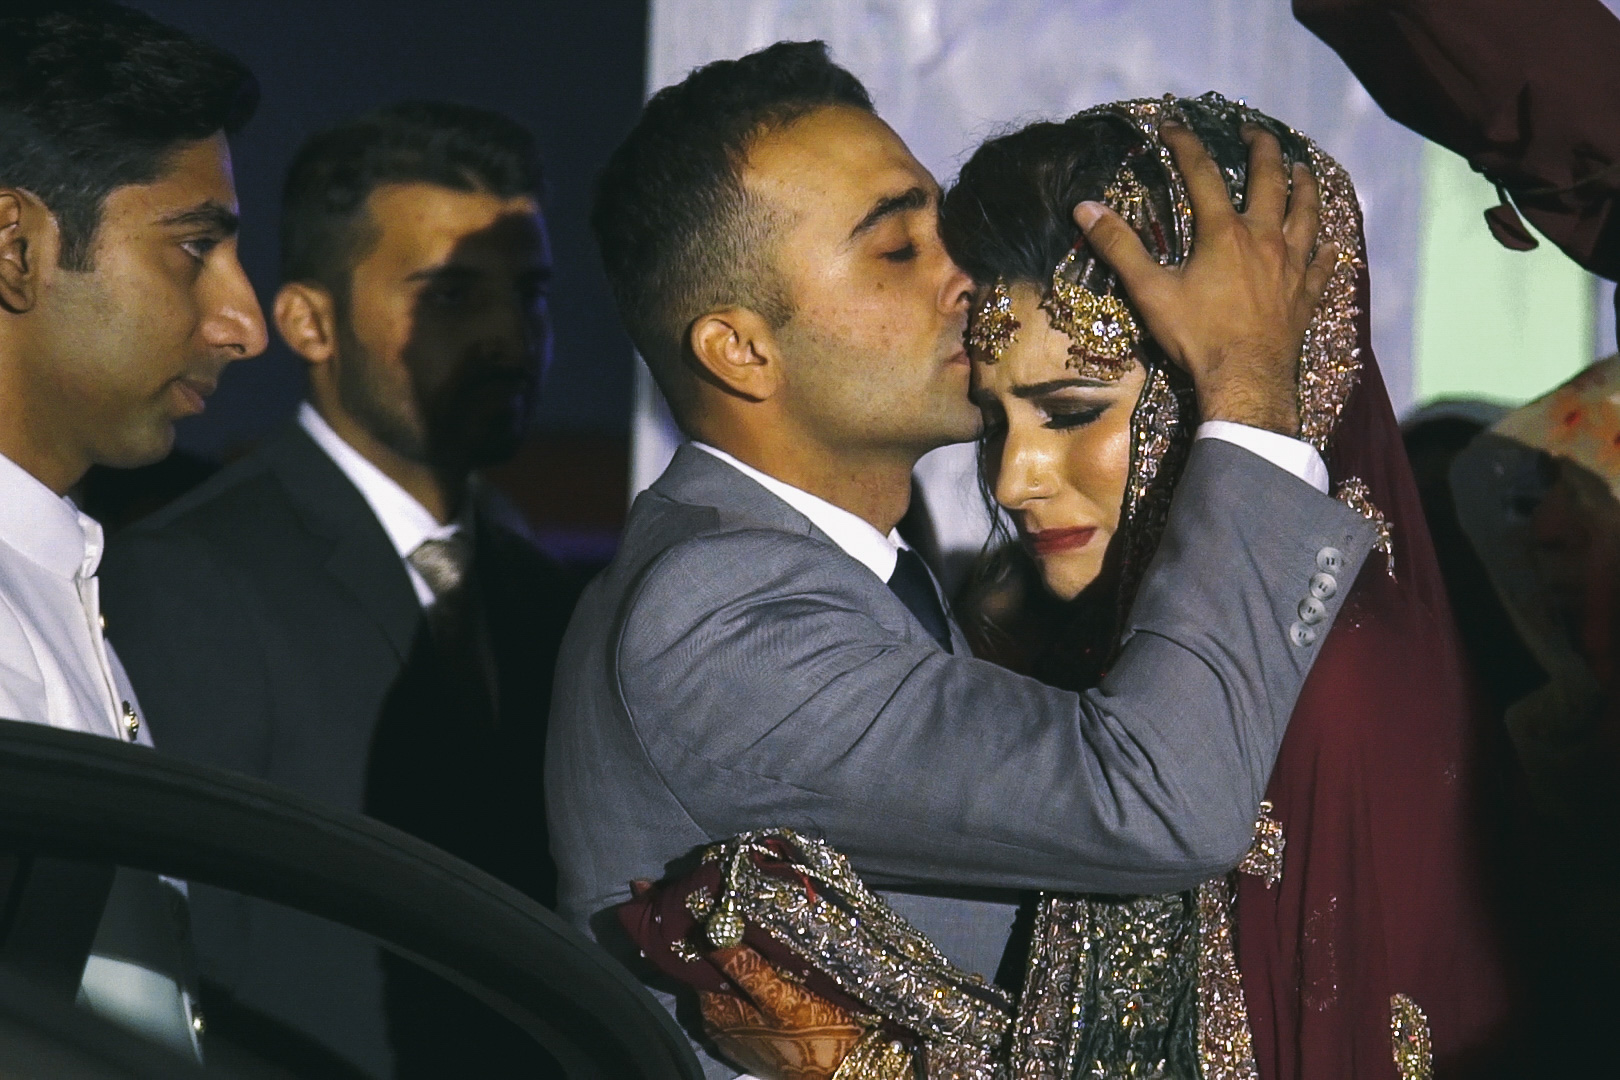  Farheen is kissed by Abdullah, her brother, as she is escorted out of the wedding venue on her  baraat . Her husband, Zia (left), waits to escort her to his family's home. The  baraat  is a somber occasion for the bride's parents as it signifies the